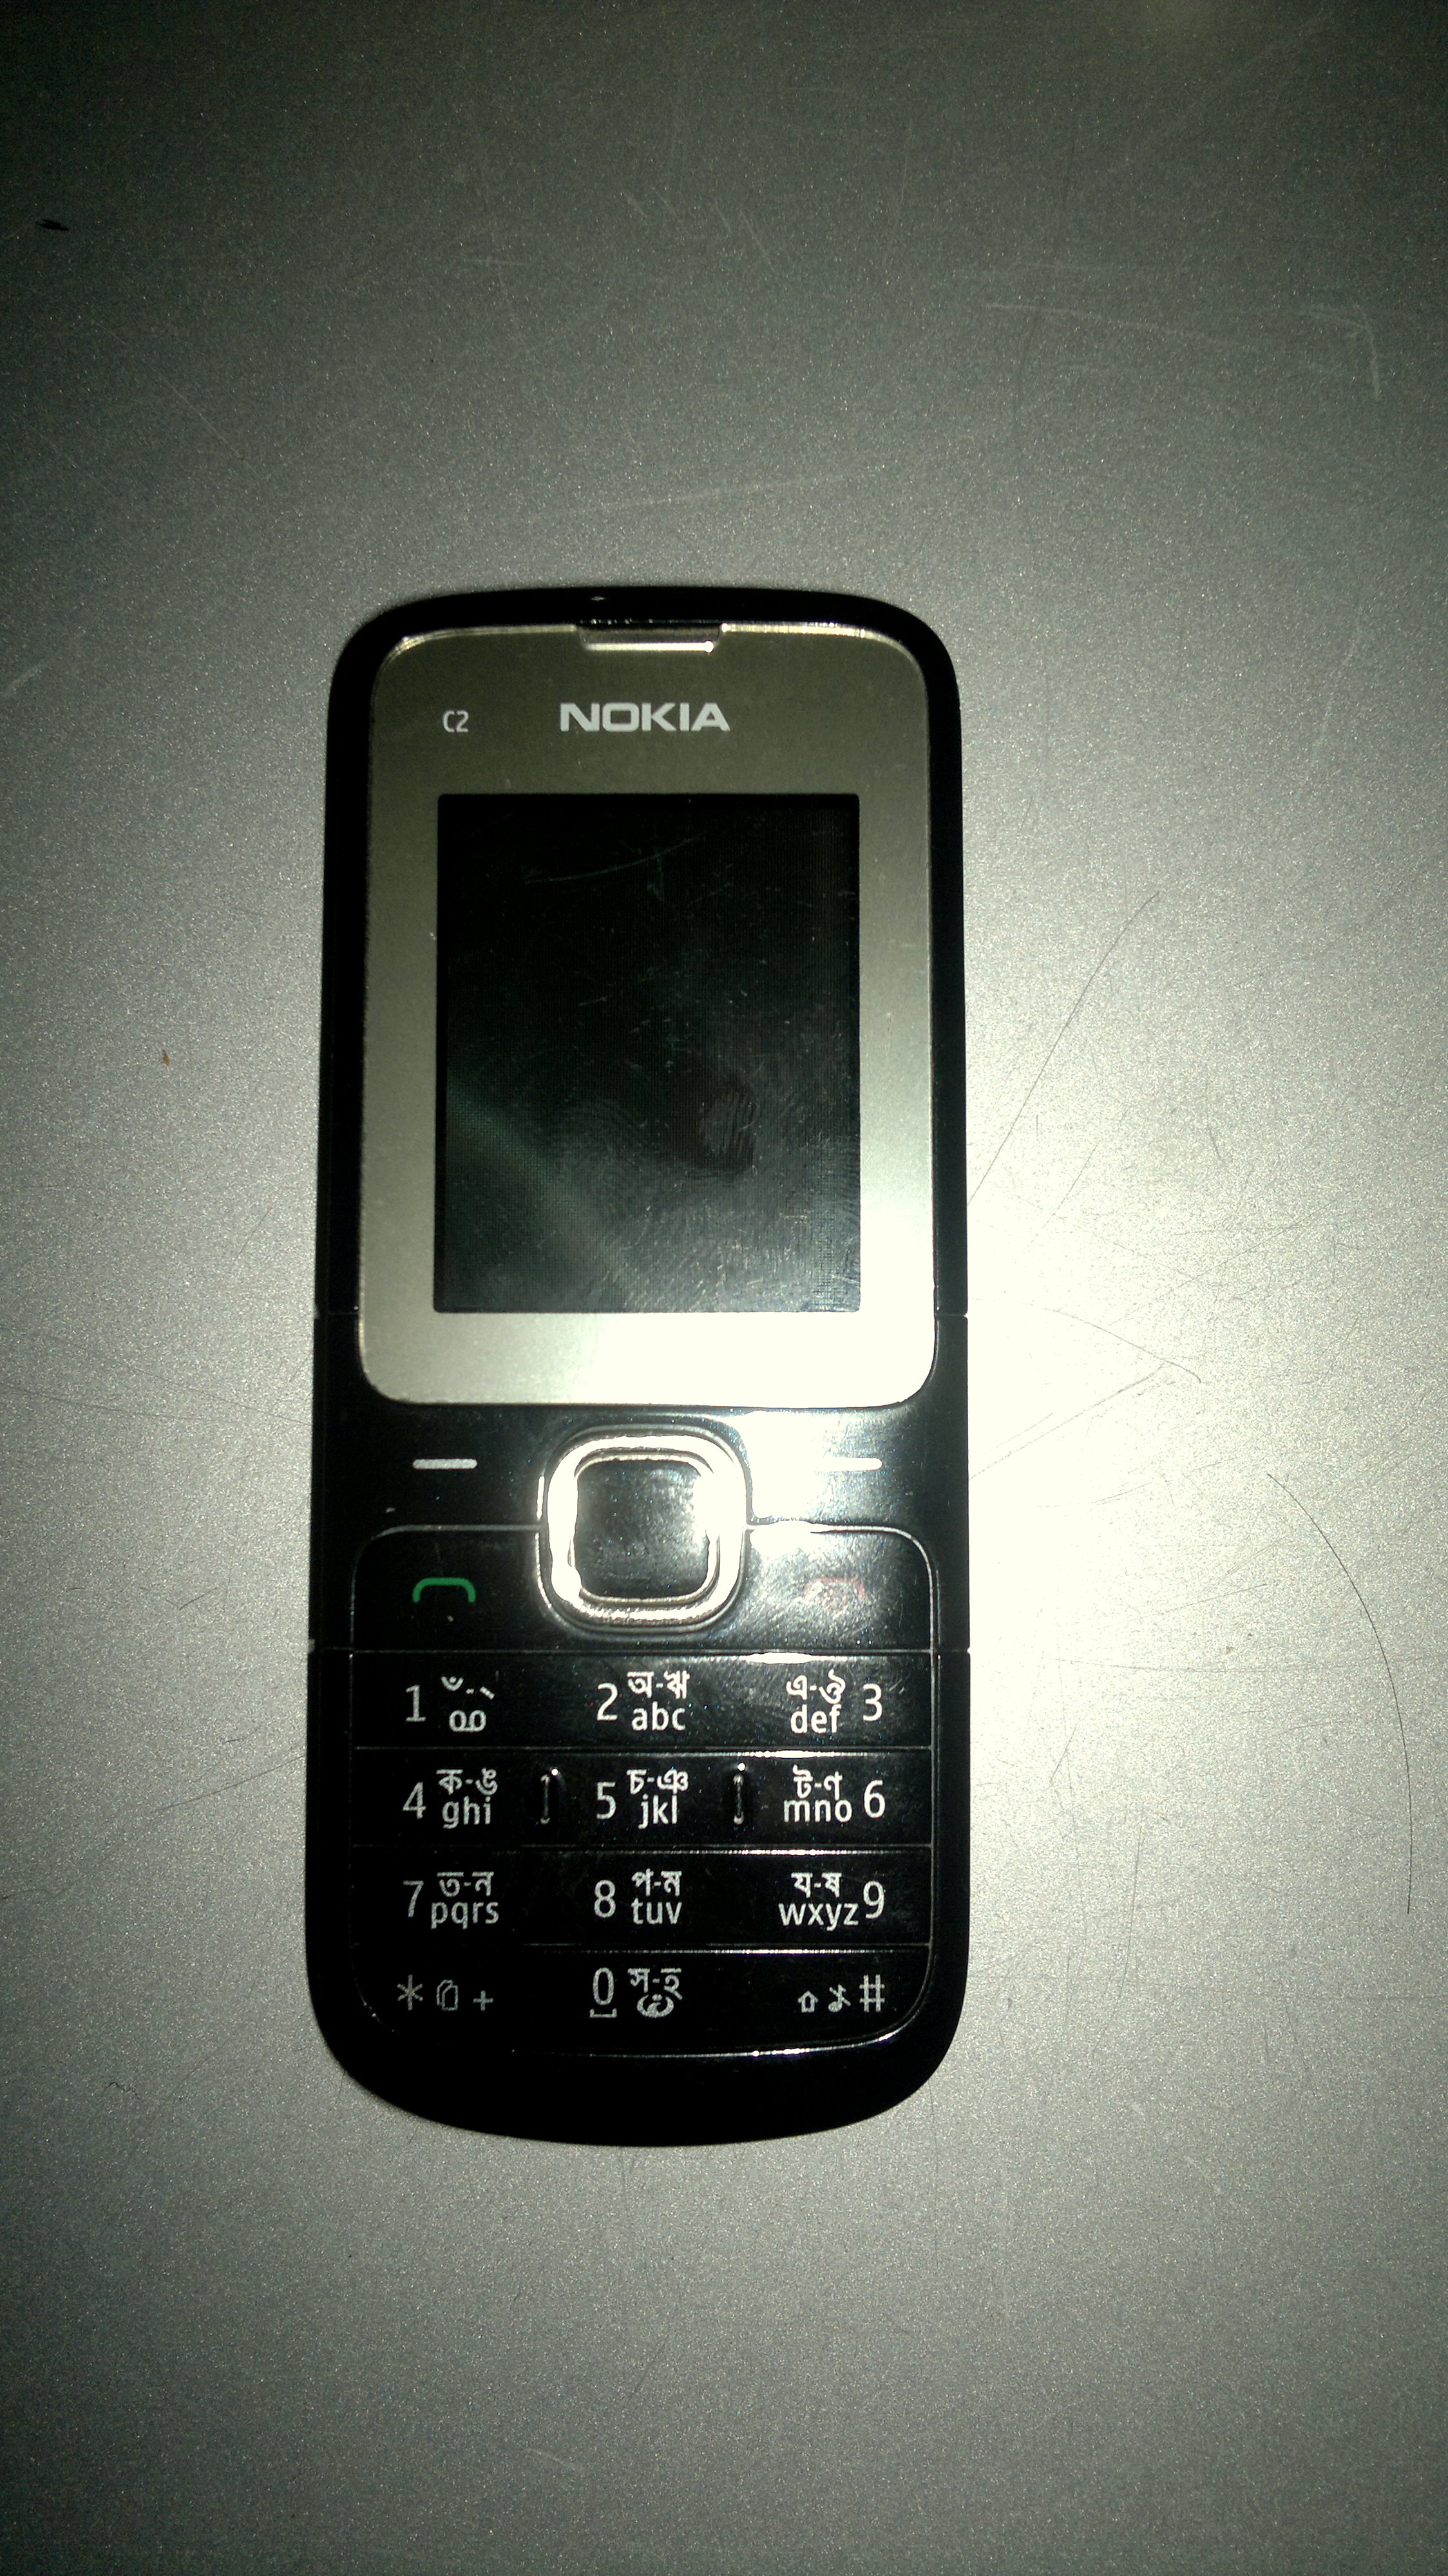 clipart for nokia c2 00 - photo #46